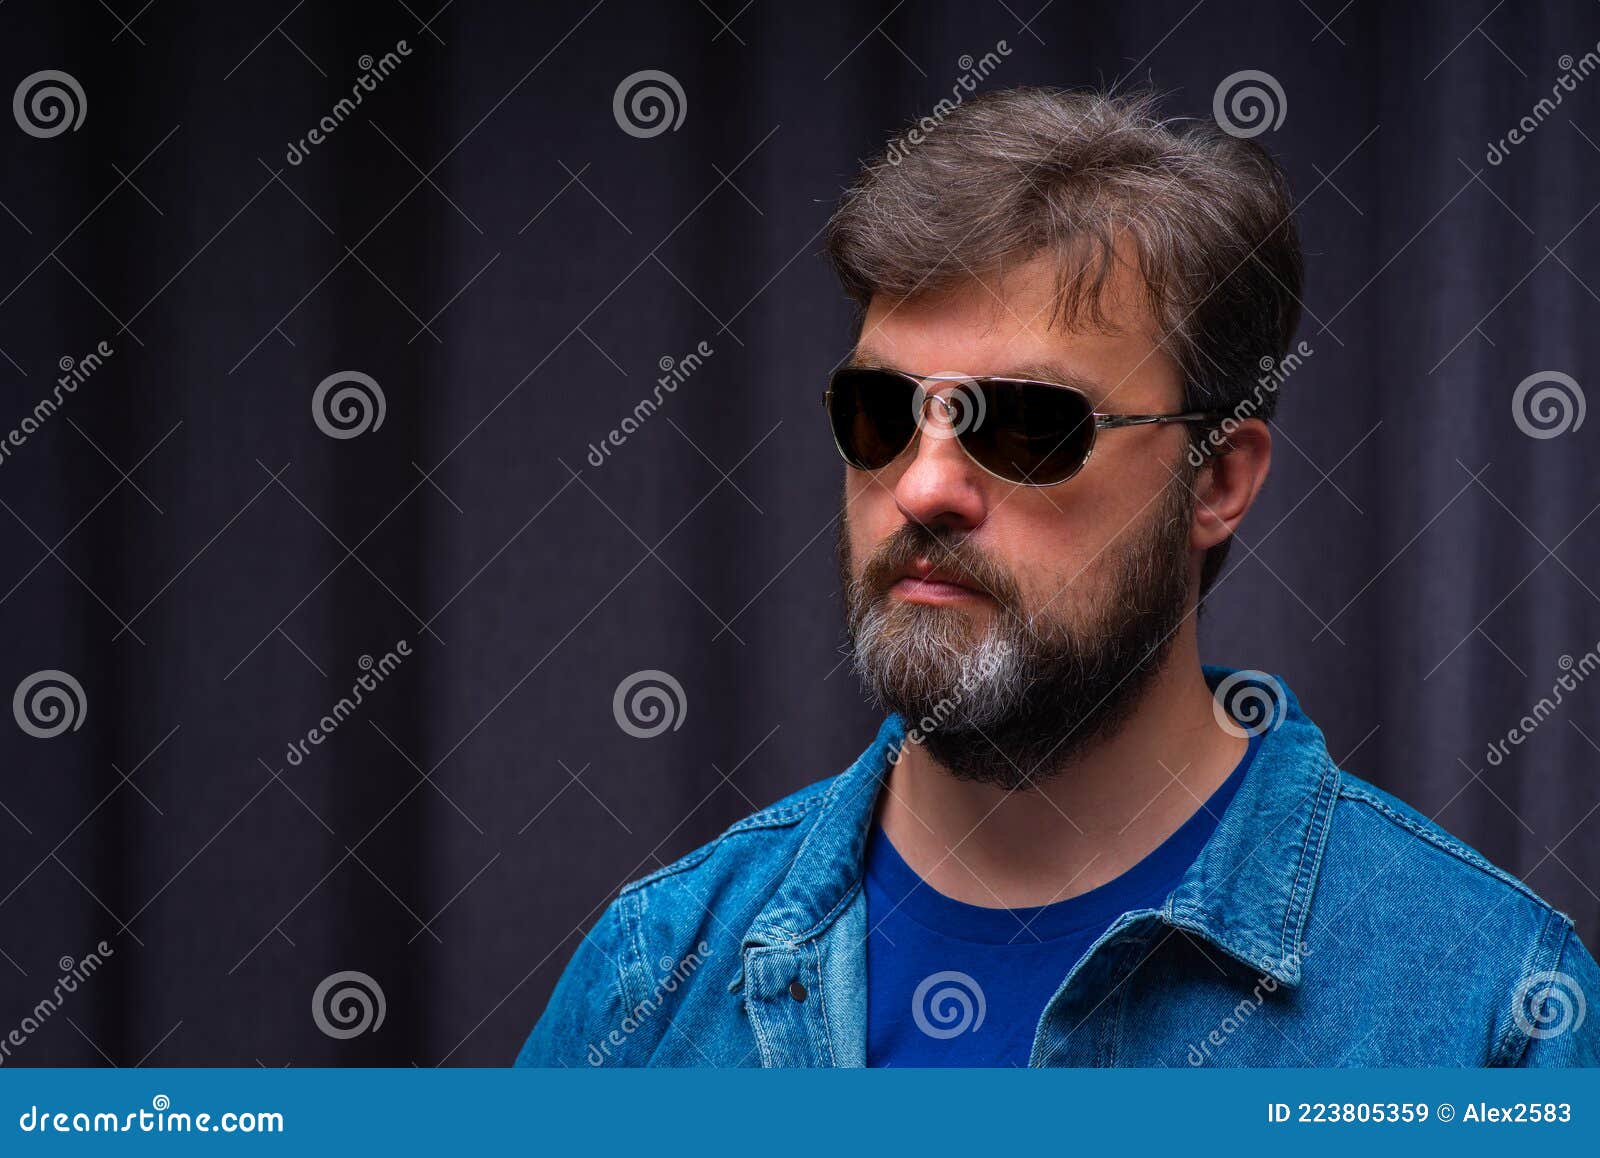 A Young Man in Dark Glasses and a Denim Jacket Close-up Stock Image ...